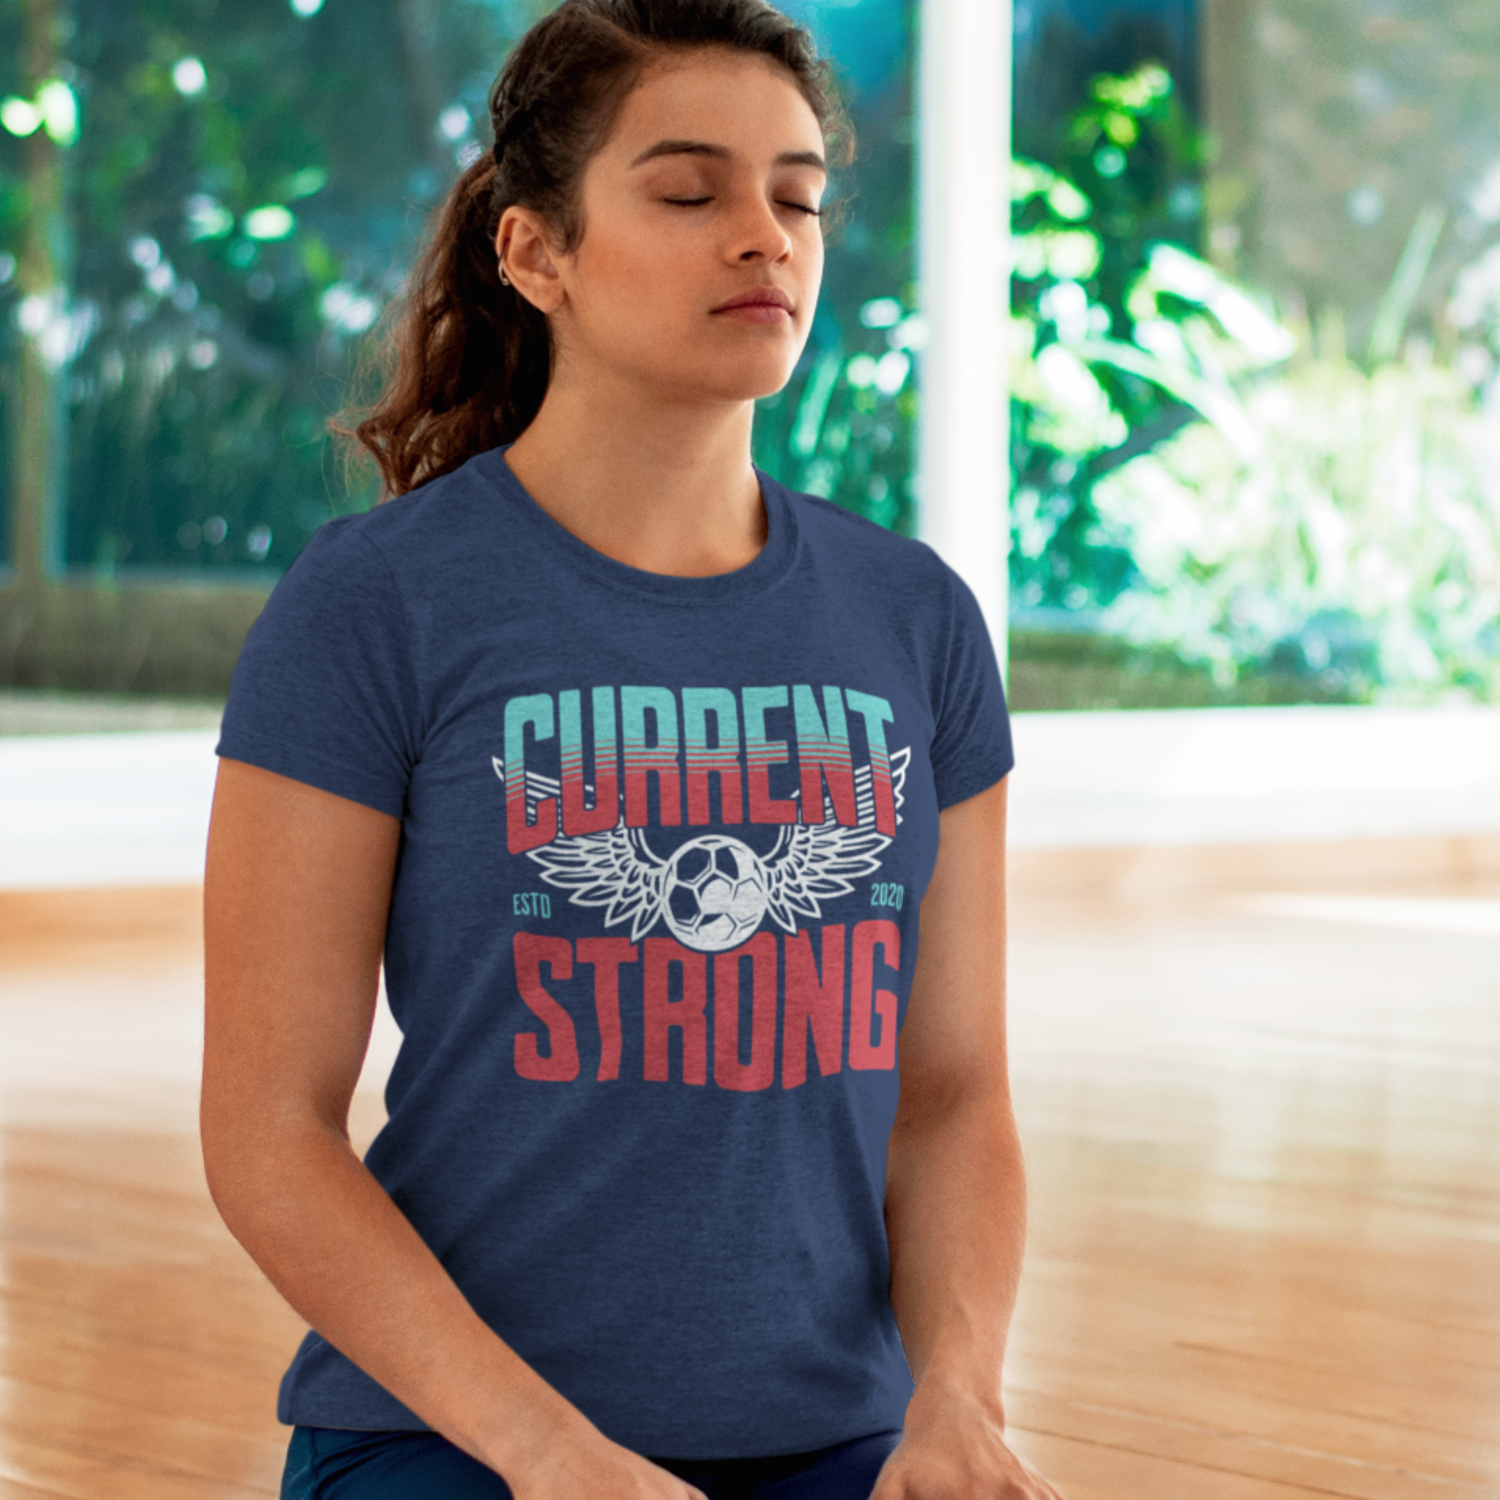 KC Swag Kansas City Current CURRENT STRONG on heather navy unisex t-shirt worn by female model on her knees meditating in a yoga studio